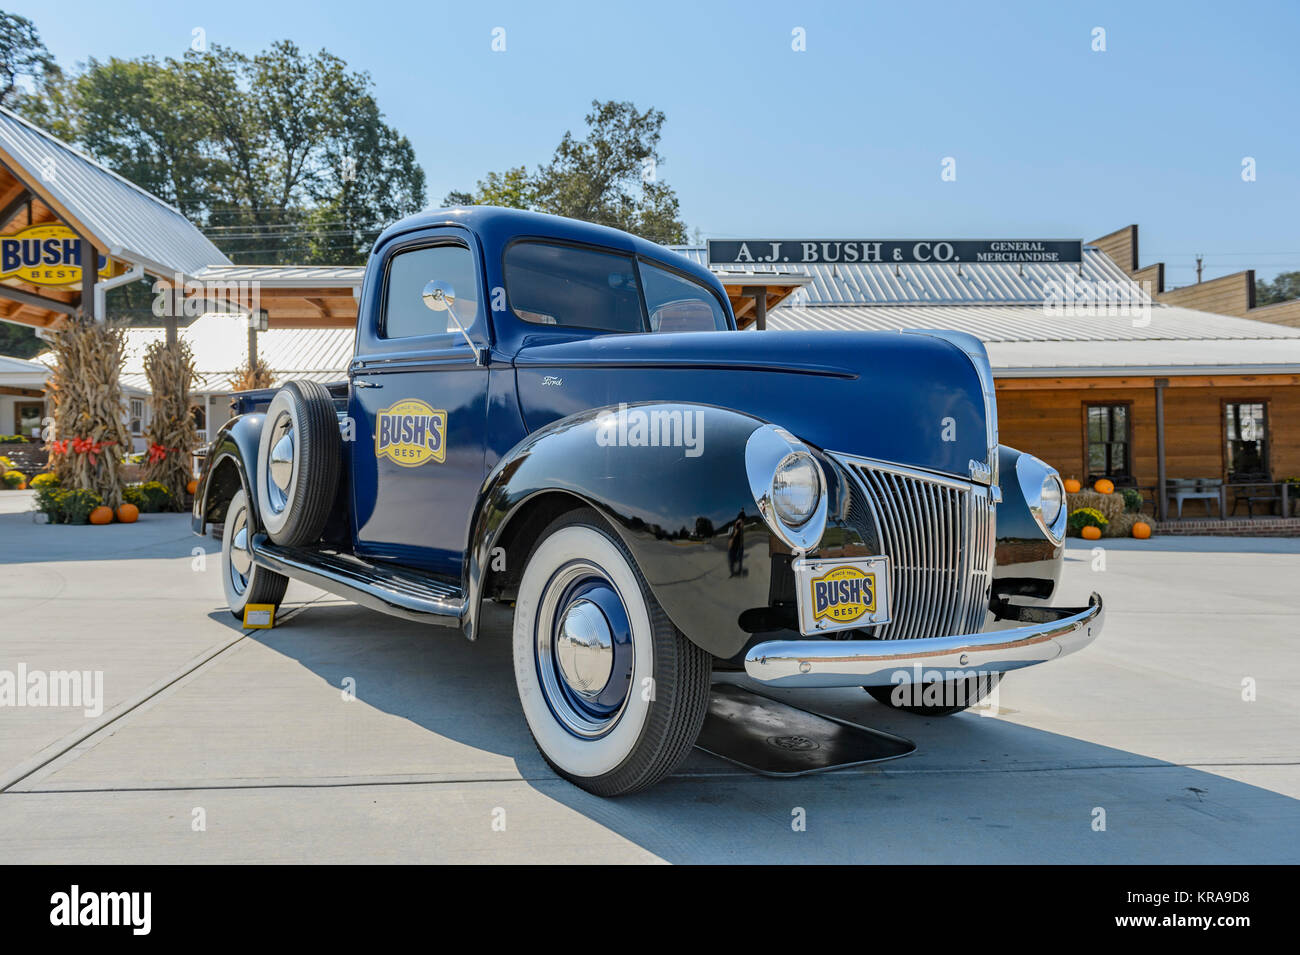 1940 Ford blue half ton pickup truck with distinctive prow front on display at the A.J. Bush & Company Visitor Center and Museum in Chestnut Hill TN. Stock Photo